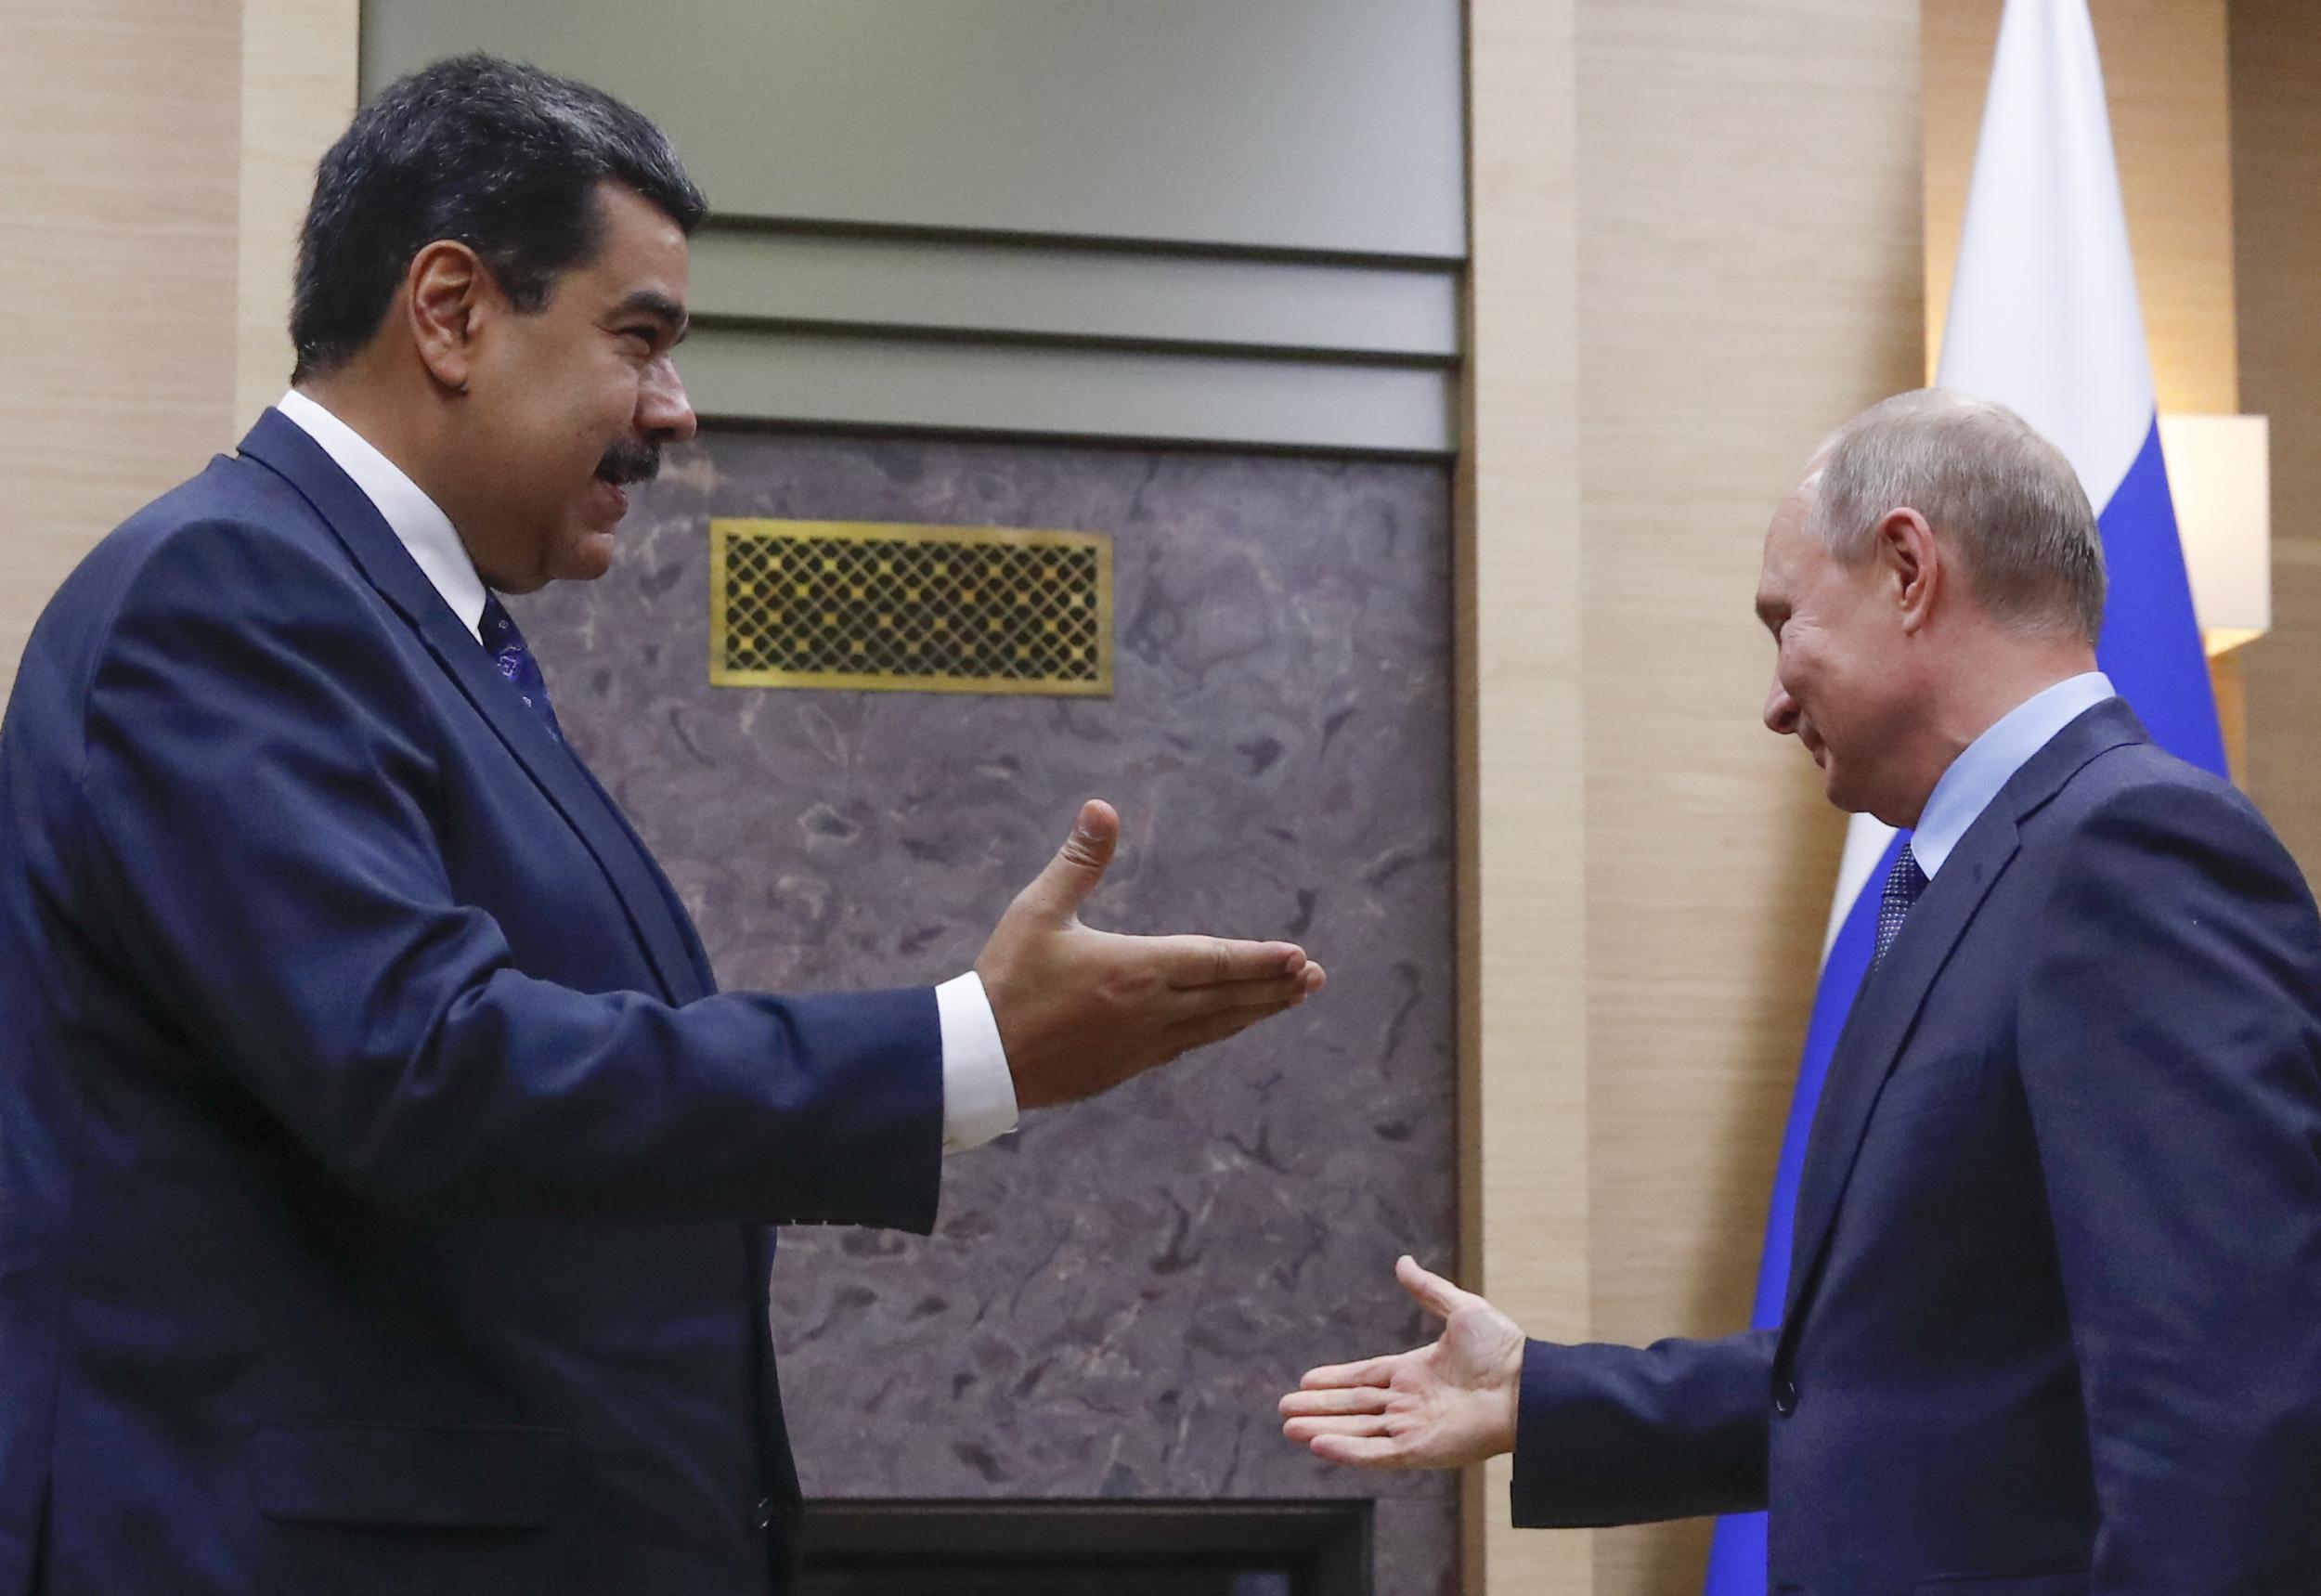 Maduro visiting Moscow in December to secure an oil deal with Putin